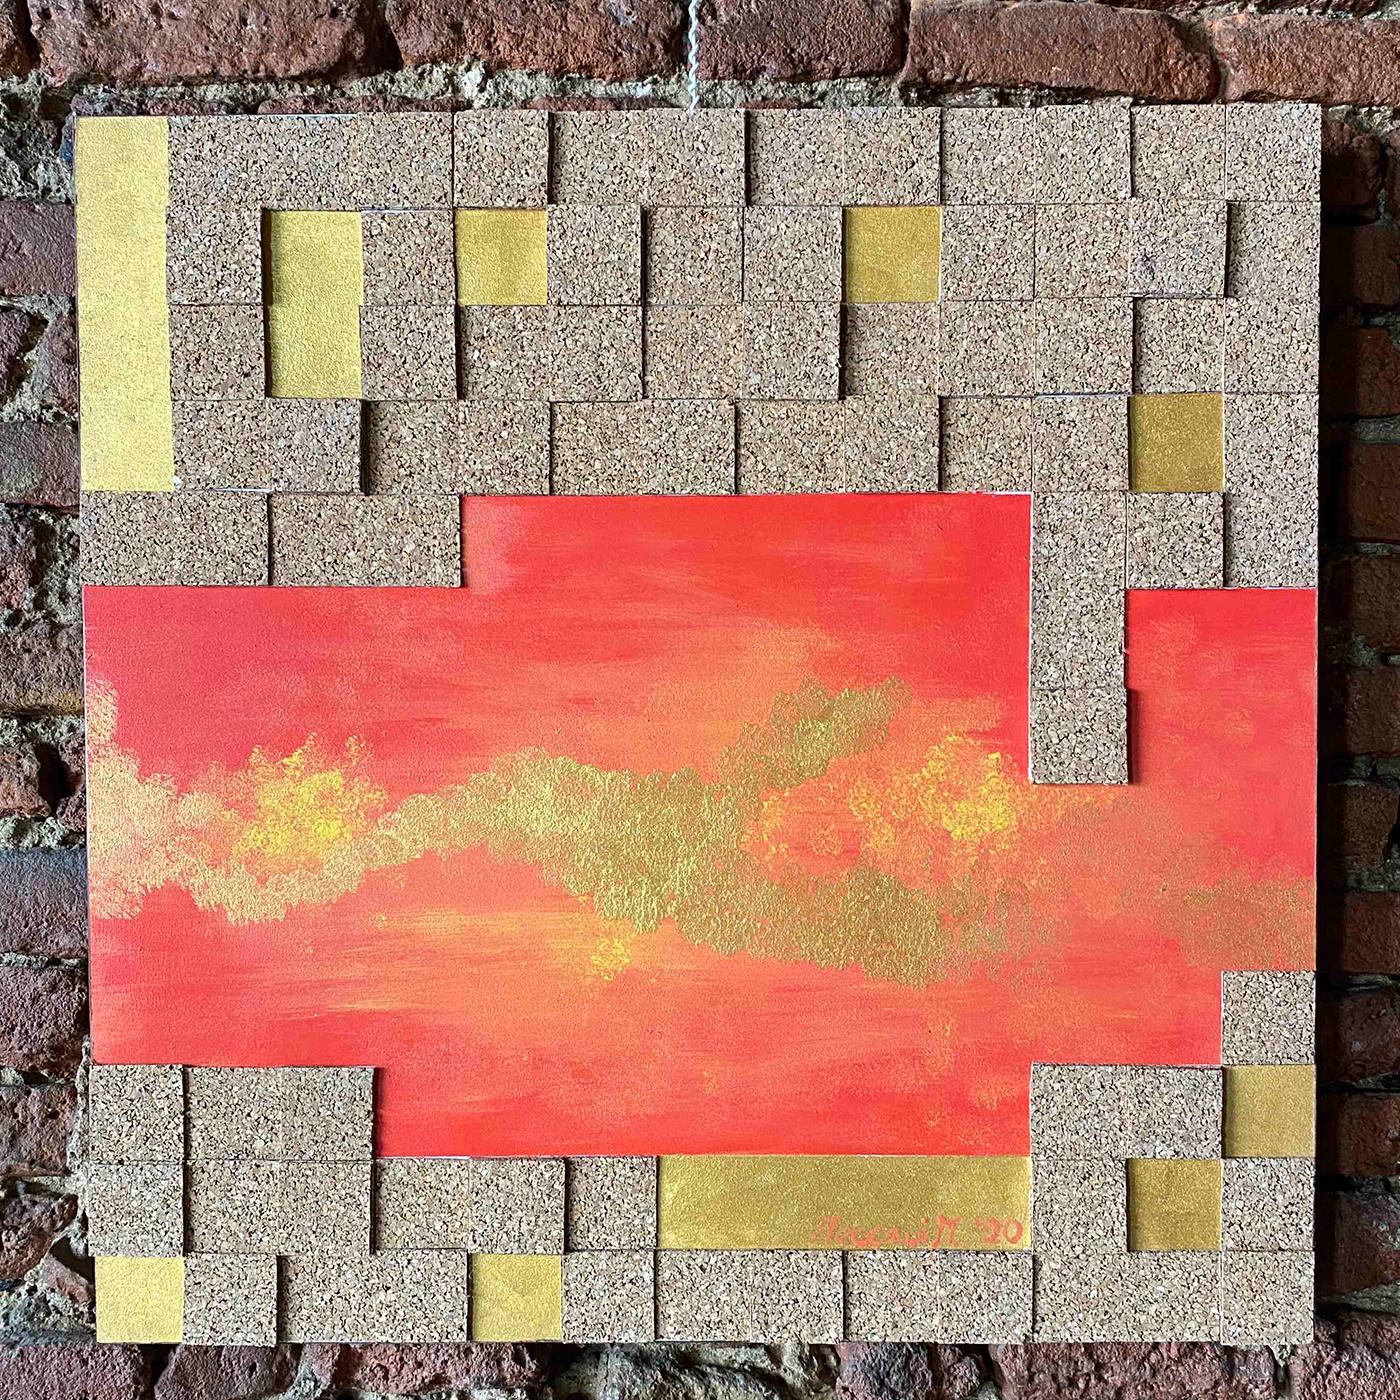 This wall panel features an alluring combination of geometric shapes and colors that will brighten up any open wall. Cork square tiles are strategically placed to reveal evocative splashes of red-orange and golden-yellow underneath. Hand-painted on